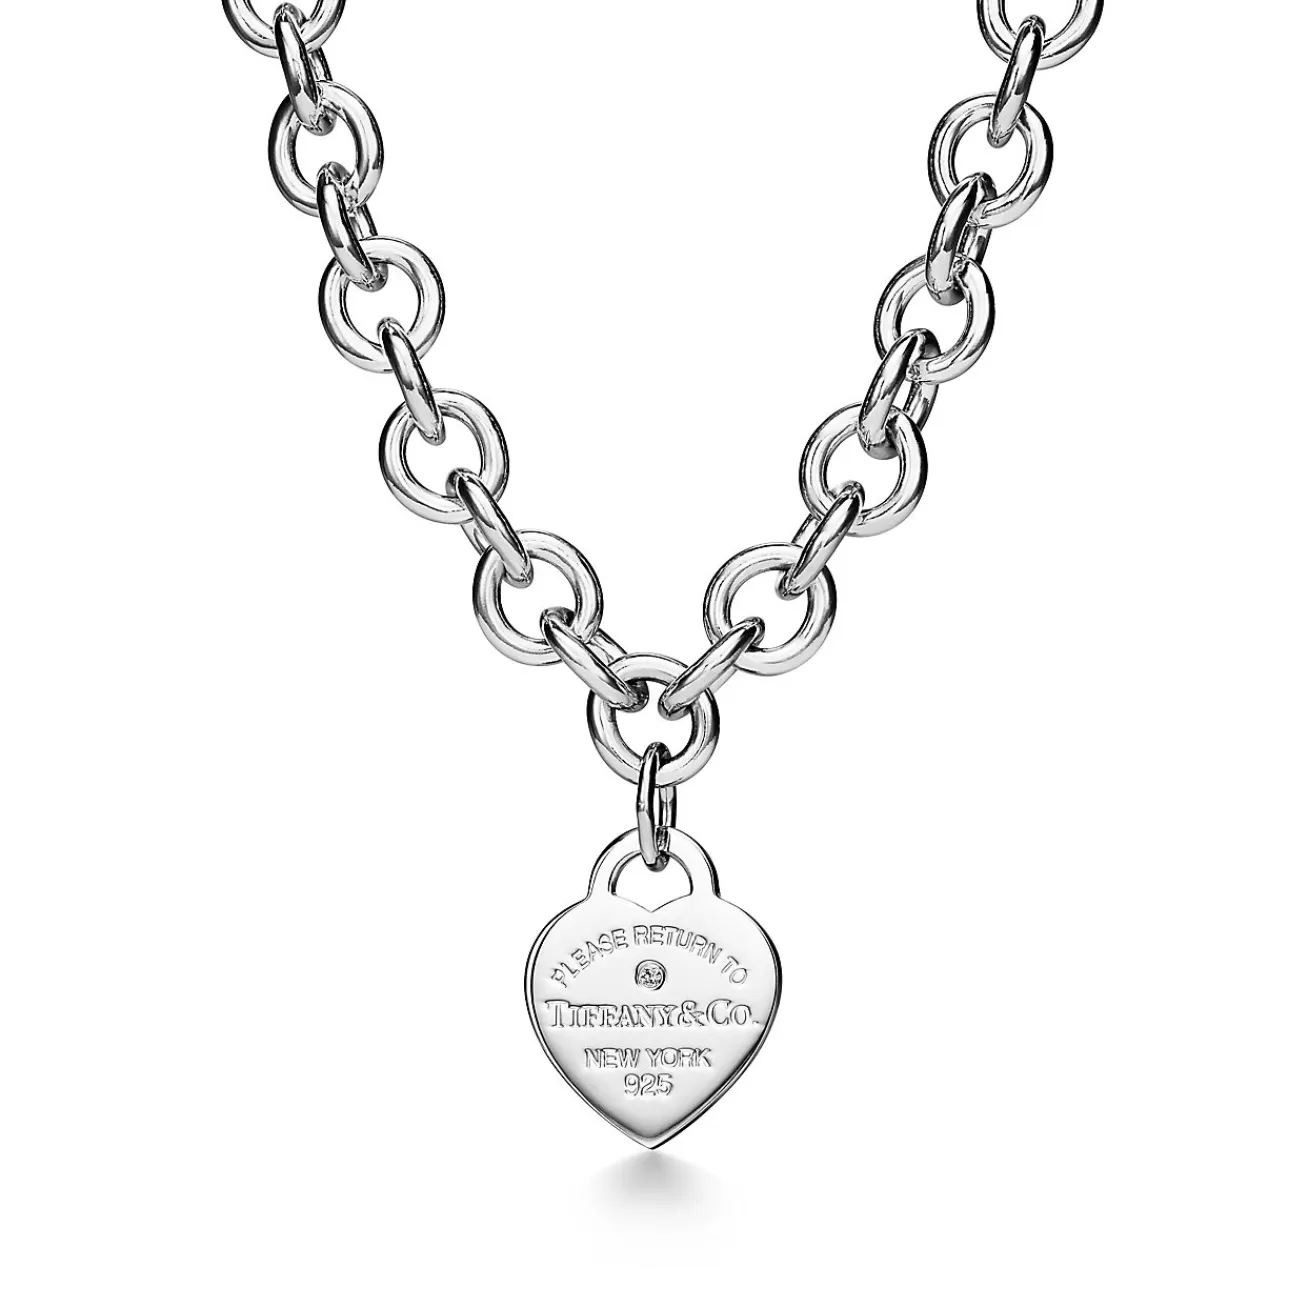 Tiffany & Co. Return to Tiffany® Heart Tag Necklace in Silver with a Diamond, Medium | ^ Necklaces & Pendants | Sterling Silver Jewelry